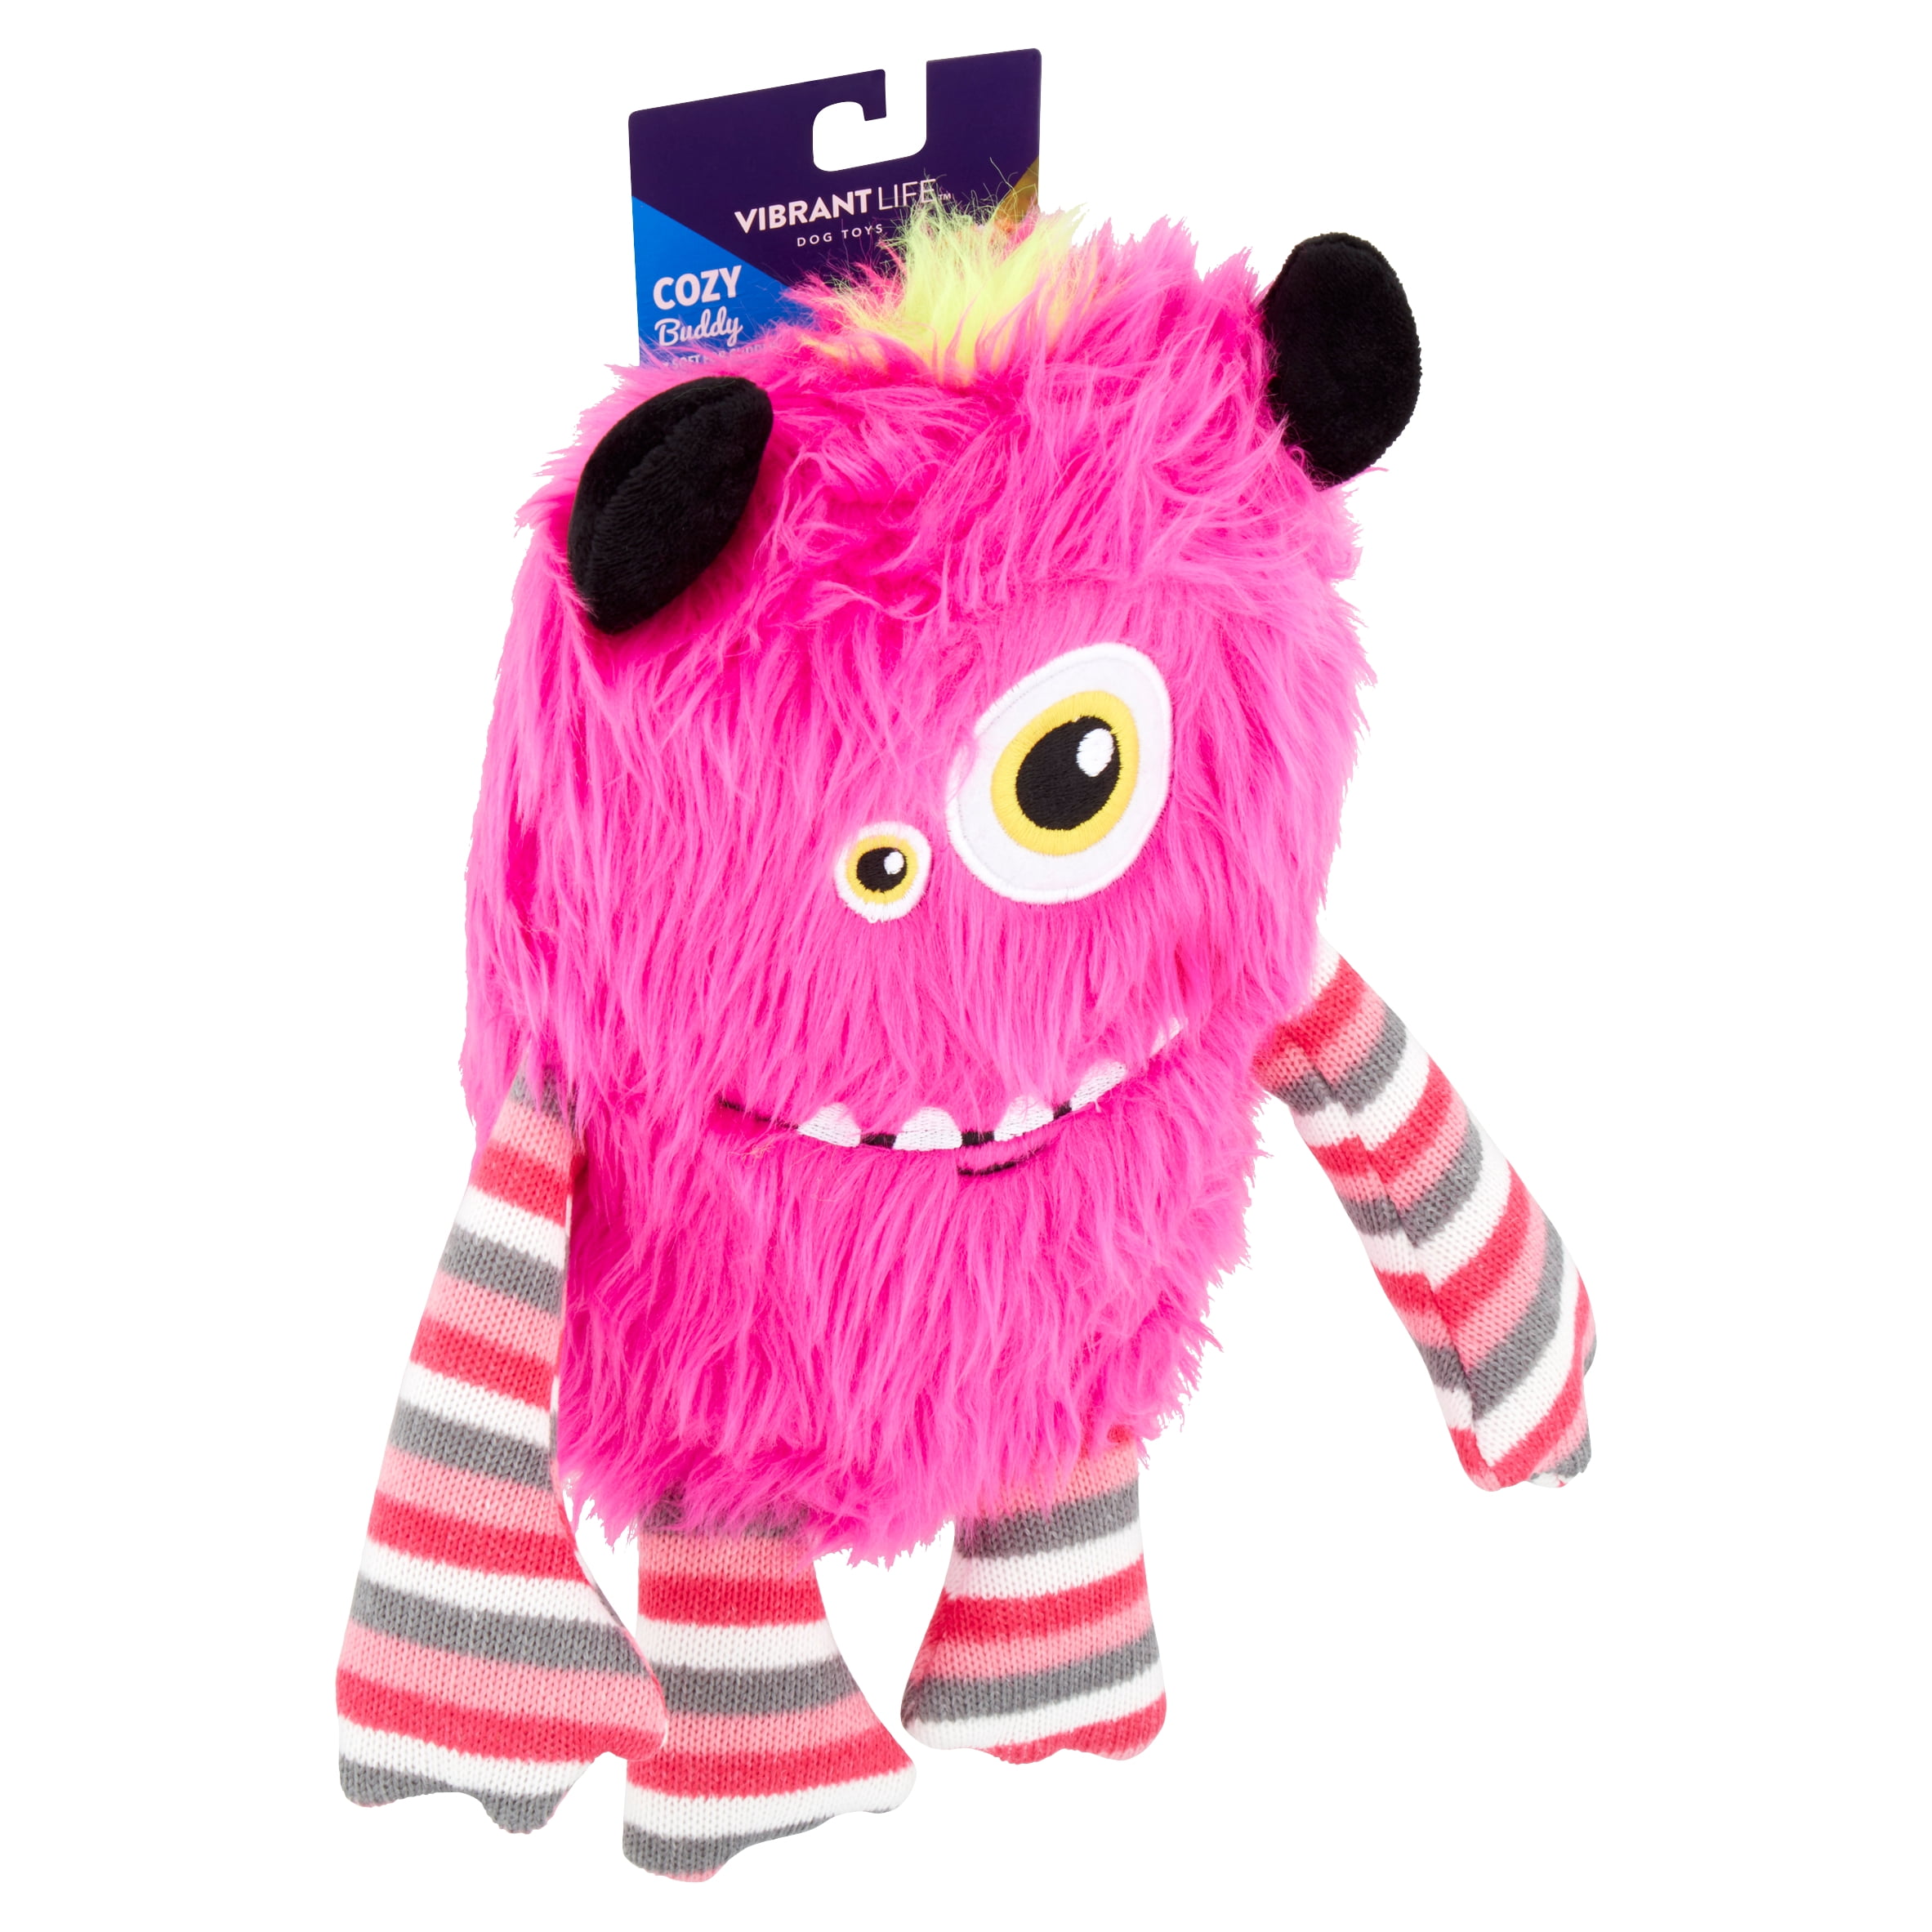 Vibrant Life Cozy Buddy Monster Dog Toy, Character May Vary, Chew Level 3 